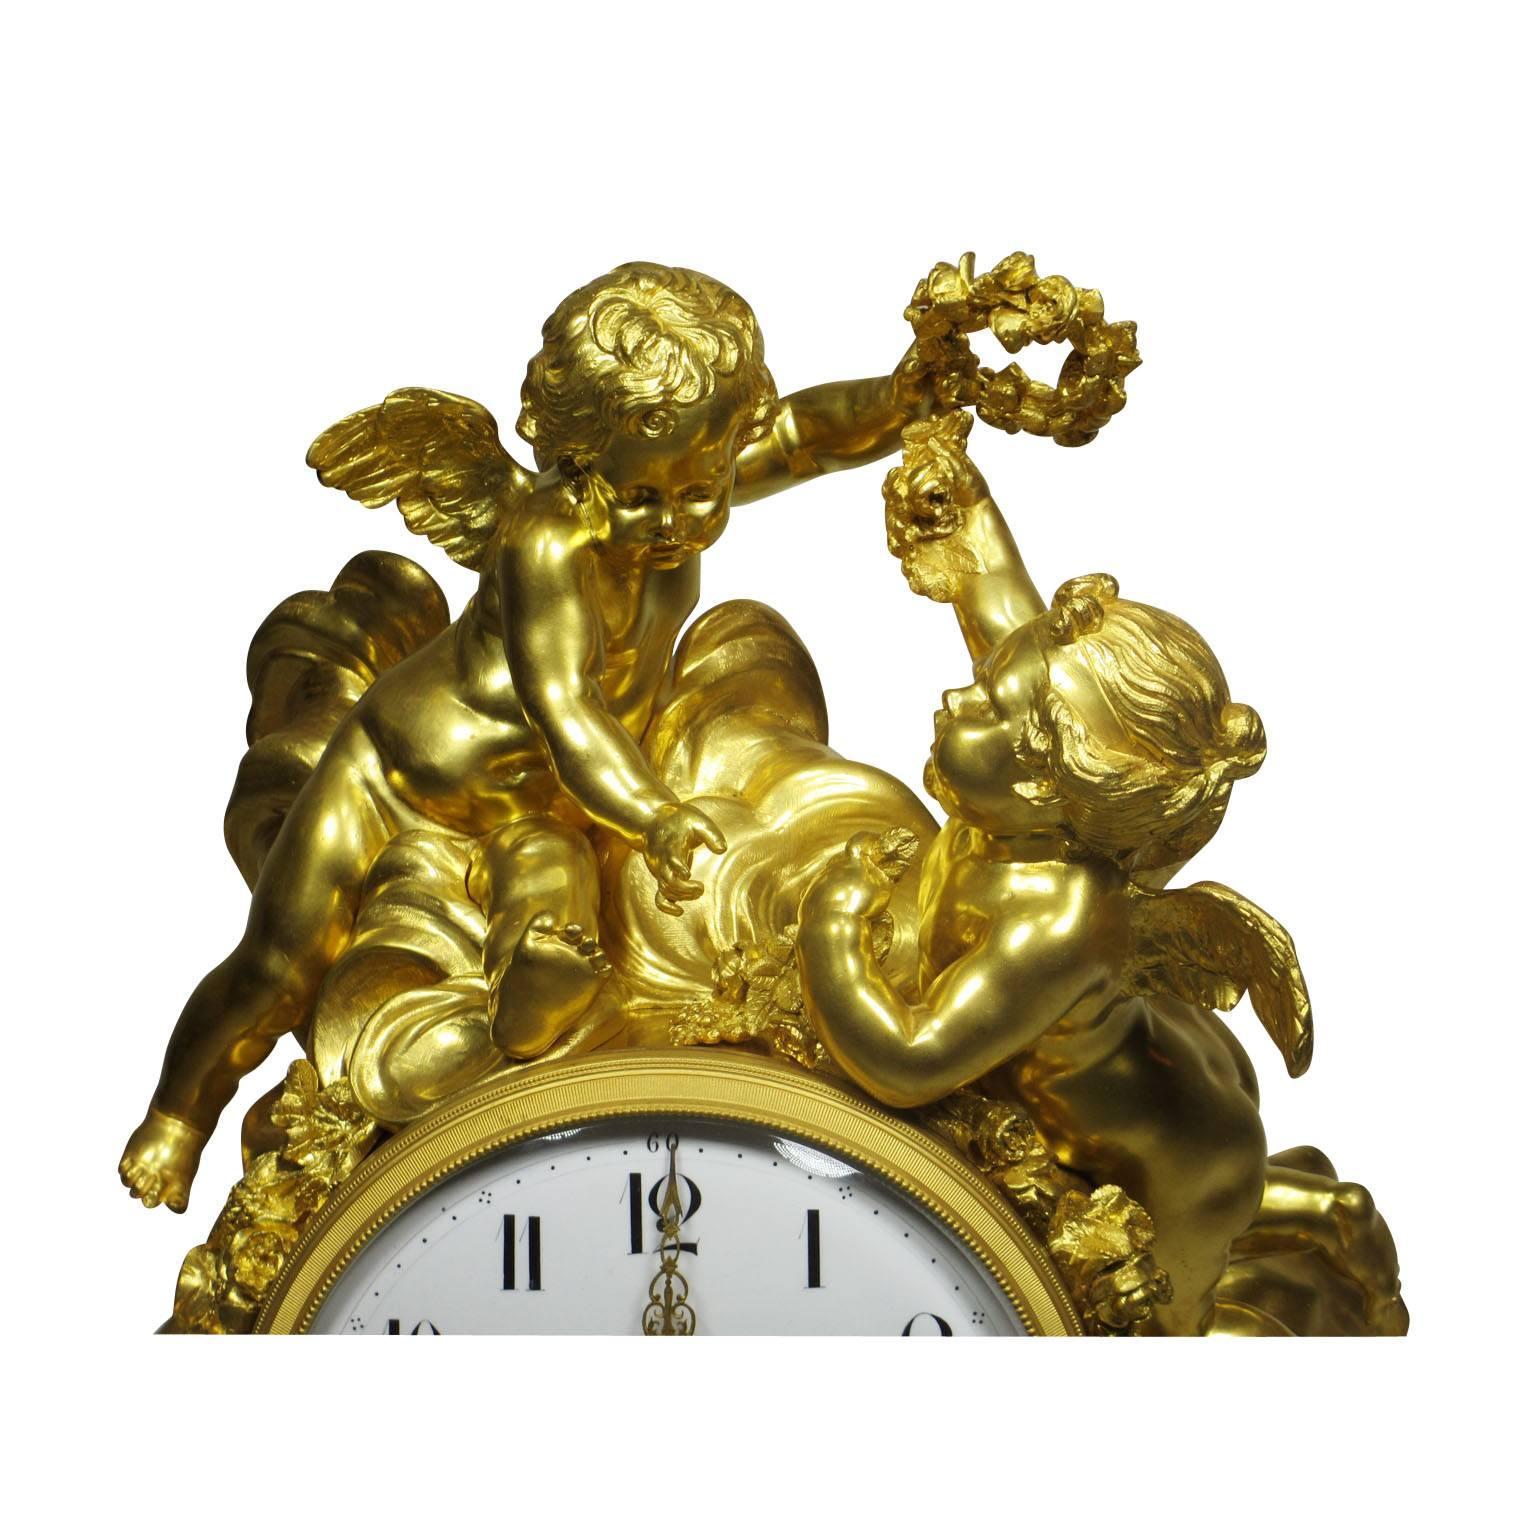 A very fine and important palatial Louis XV style 19th-20th century figural gilt bronze white marble mantel clock with figures of cherubs, the enamel dial with Arabic numerals and foliate pierced gilt hands. in the style of Alfred-Emmanuel-Louis